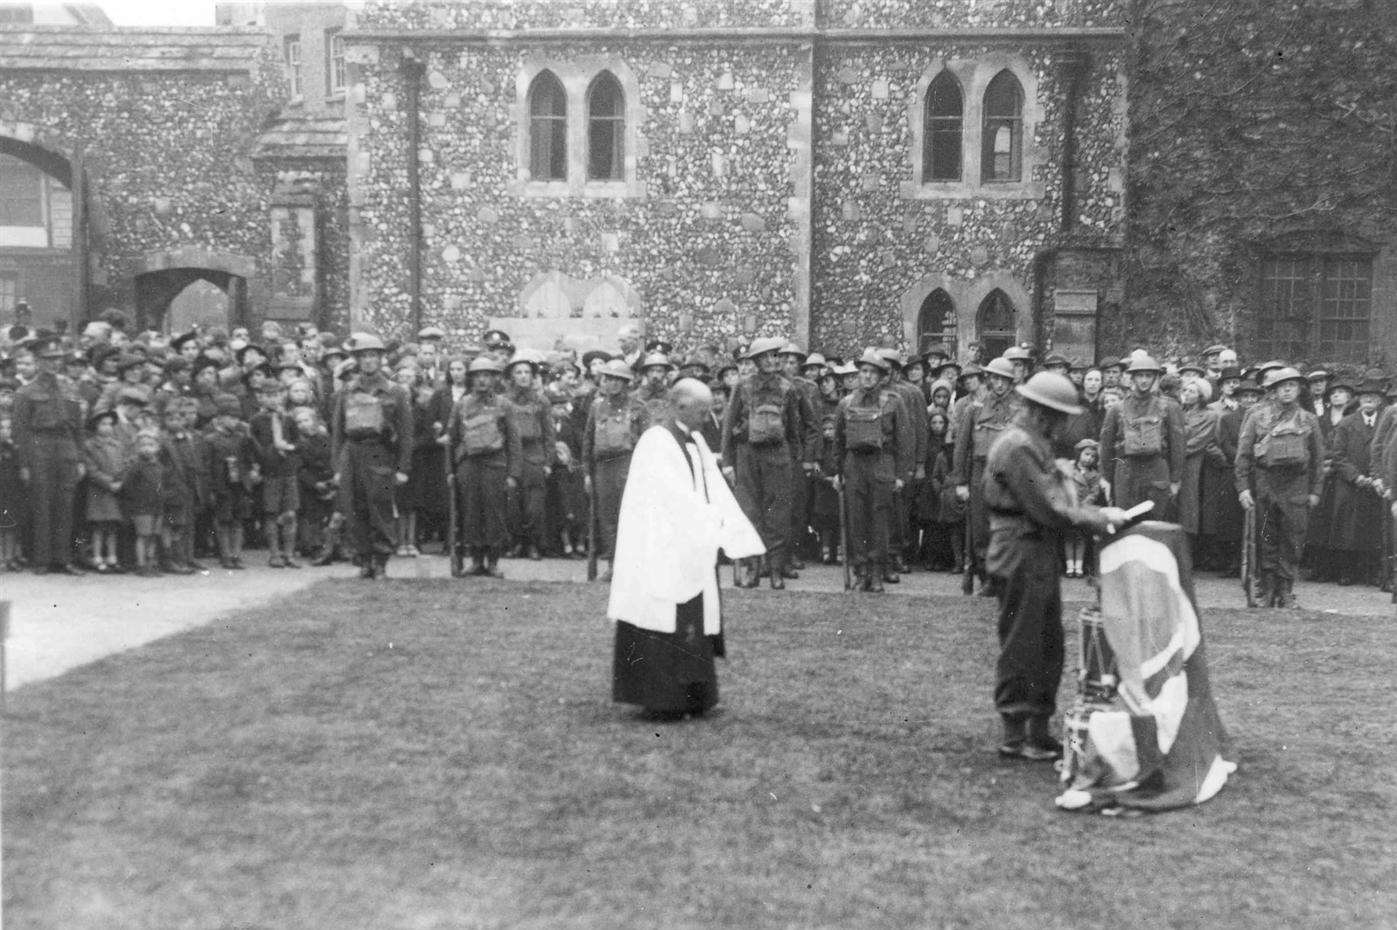 A drumhead service during the Second World War